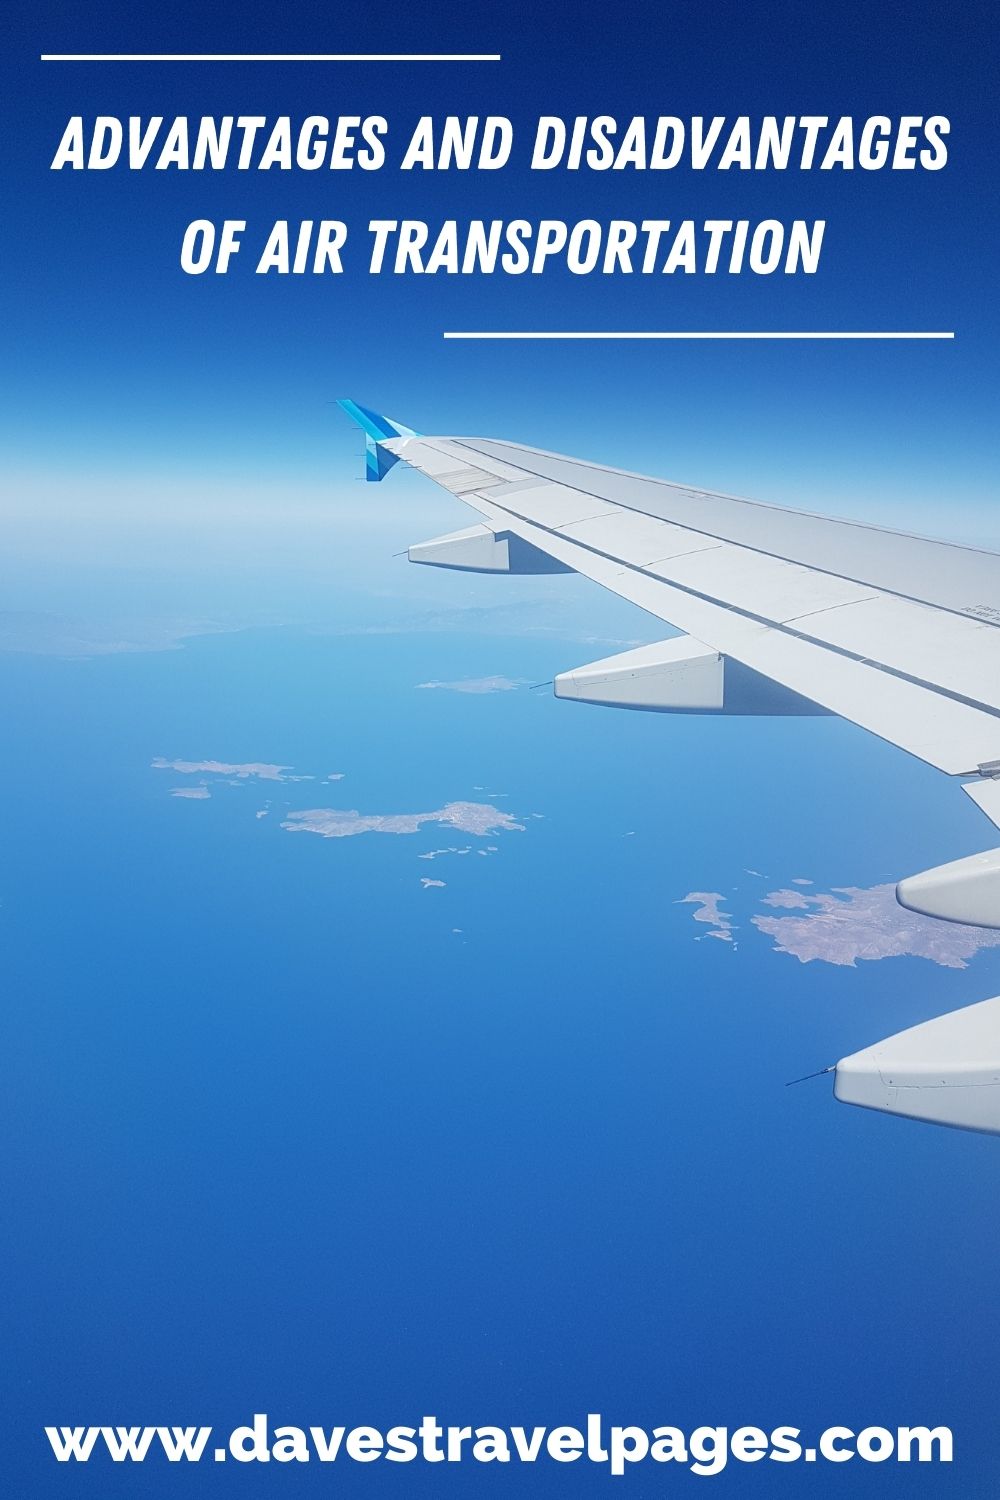 What are the advantages and disadvantages of air transportation